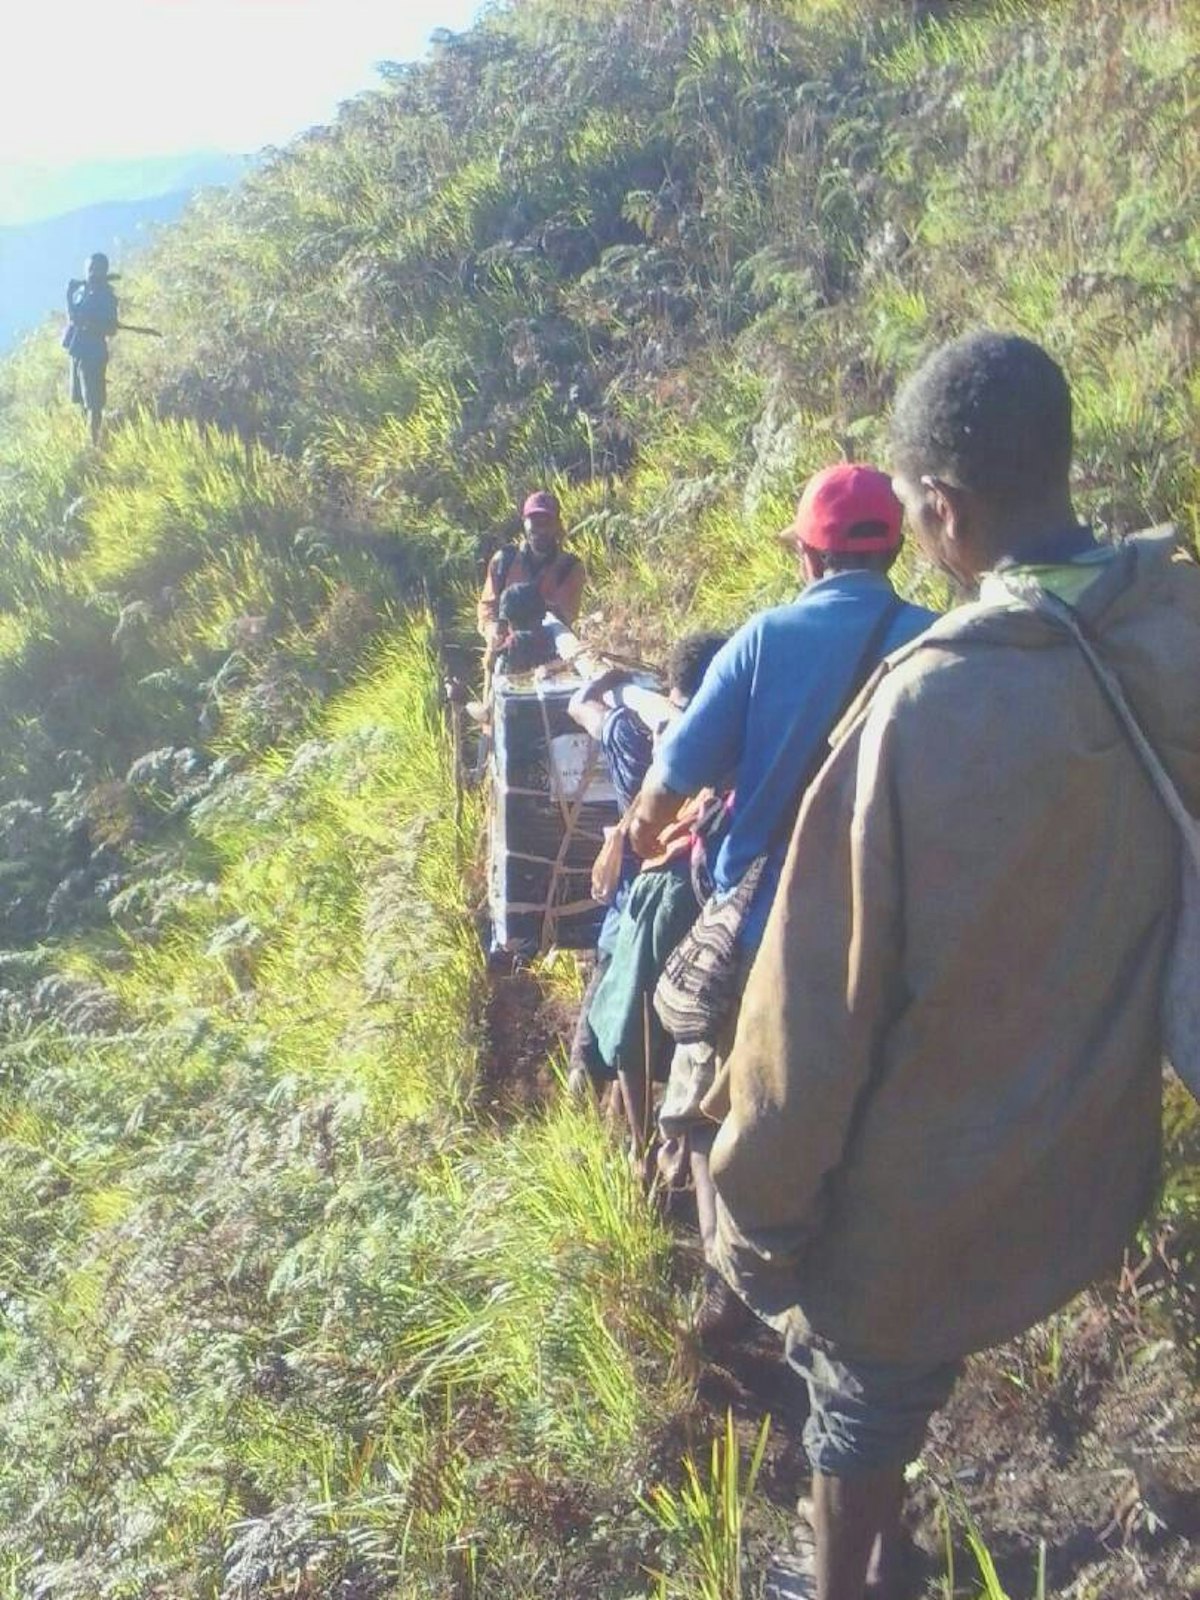 In order to print the thousands of invitations needed for the bicentenary celebrations in the village of Daga in Papua New Guinea, a group of friends carried a photocopier through the mountains.